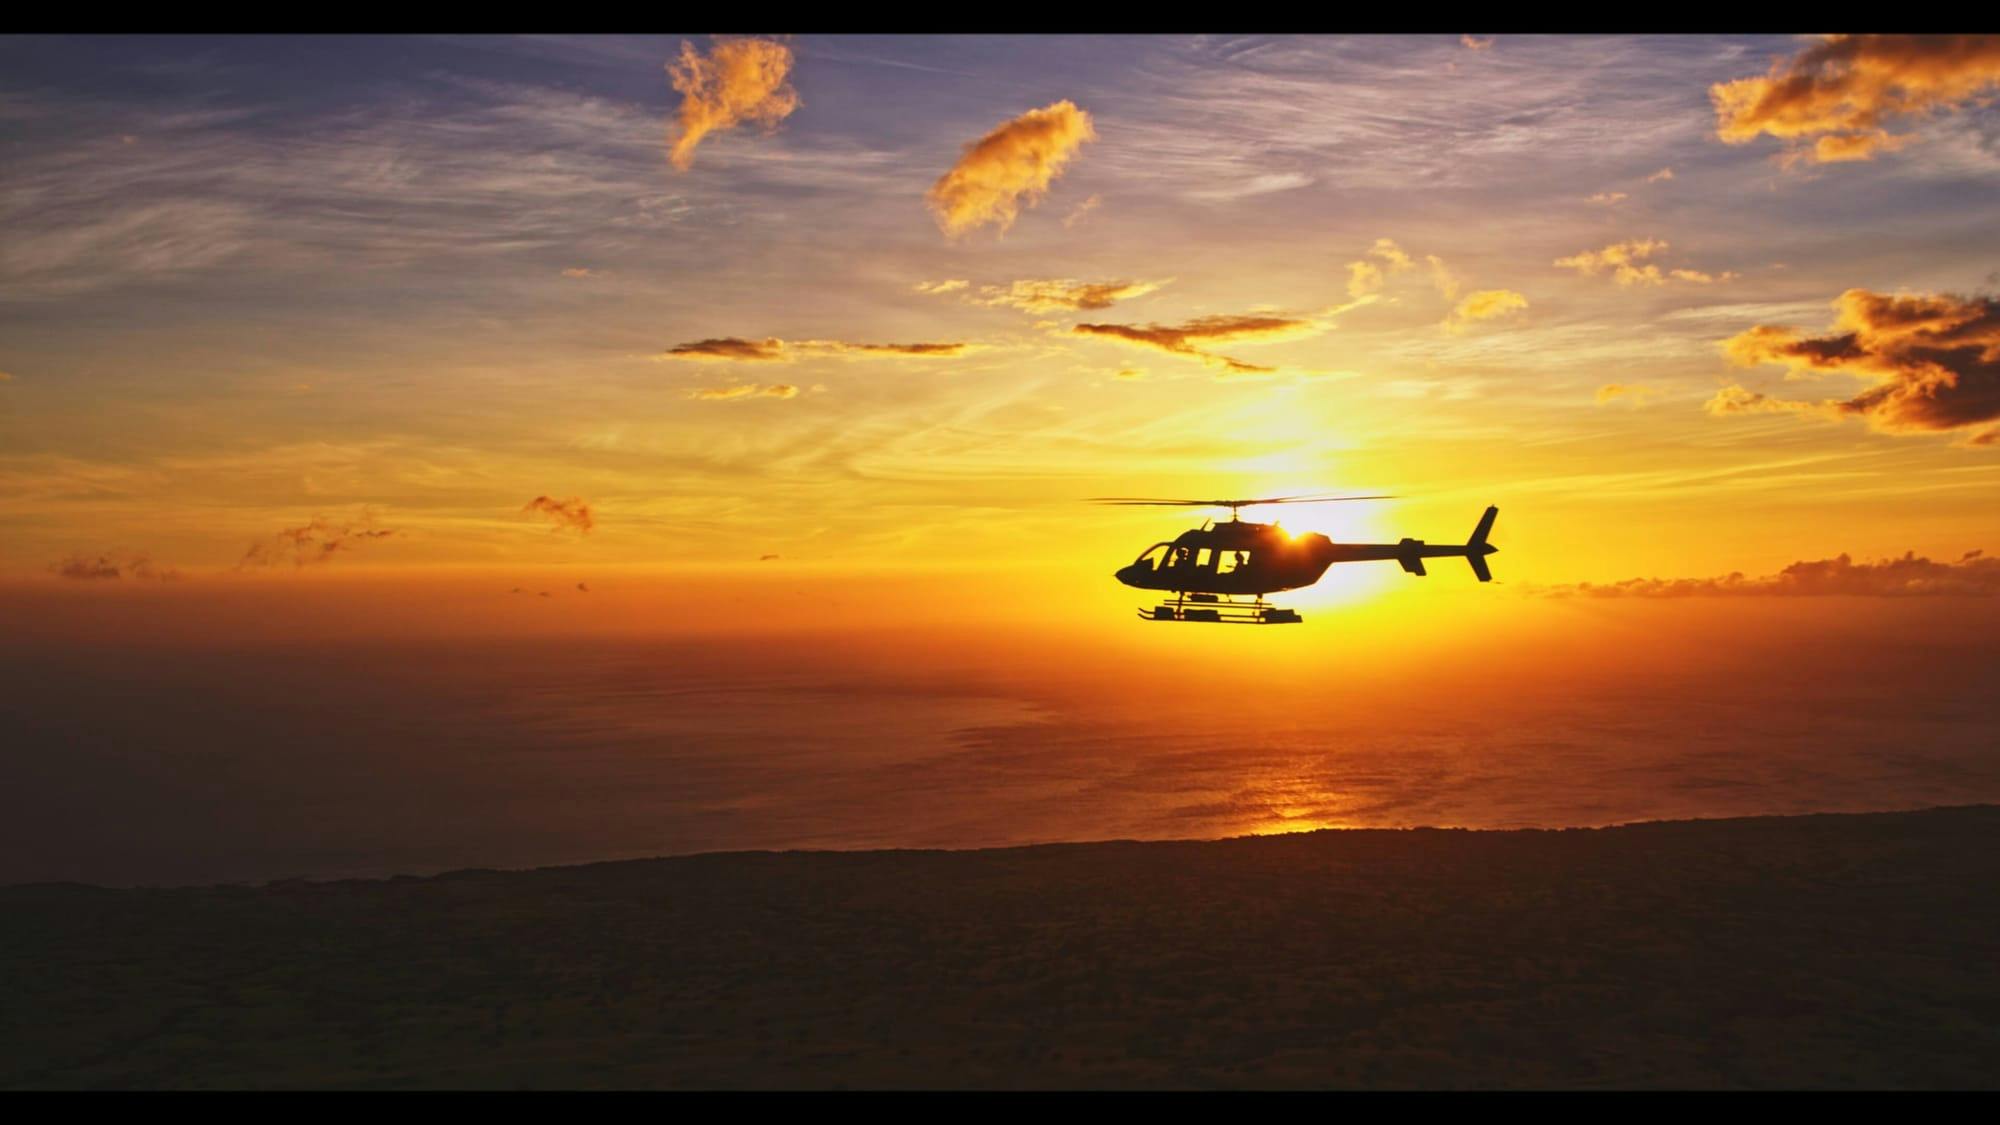 Helicopter at Sunset